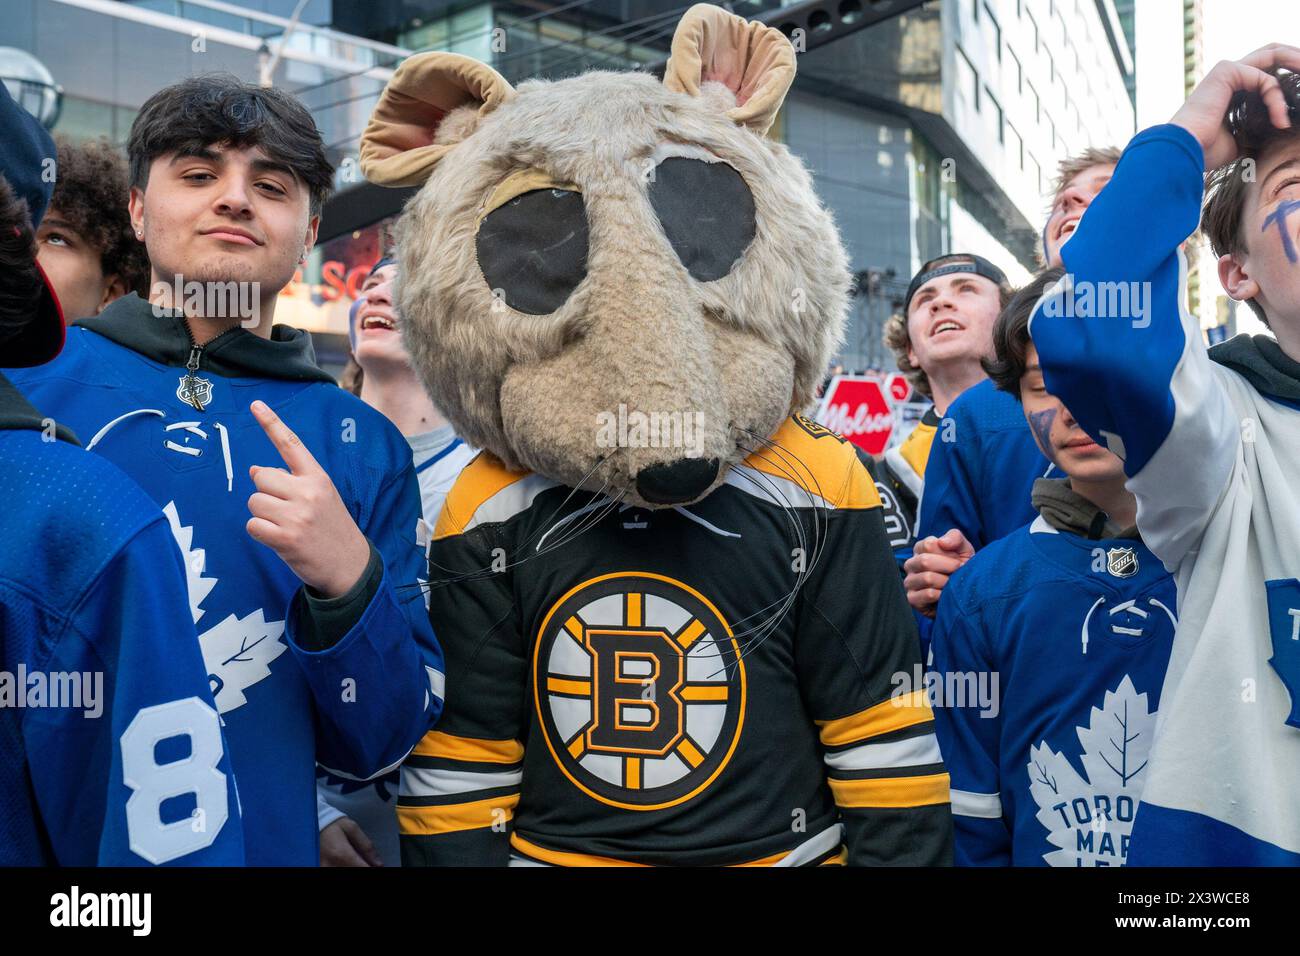 Fan dressed as Boston Bruins mouse at Maple Leaf Square outside Scotibank Arena, watching Round 1, Game 4 playoff game of Toronto Maple Leafs vs Boston Bruins playoff game on a giant screen. During Toronto Maple Leafs playoff games, Maple Leaf Square transforms into a sea of blue and white, echoing with the chants of passionate fans eagerly rallying behind their team's quest for victory. The electric atmosphere radiates anticipation and excitement, creating unforgettable memories for both die-hard supporters and casual observers alike. (Photo by Shawn Goldberg/SOPA Images/Sipa USA) Stock Photo